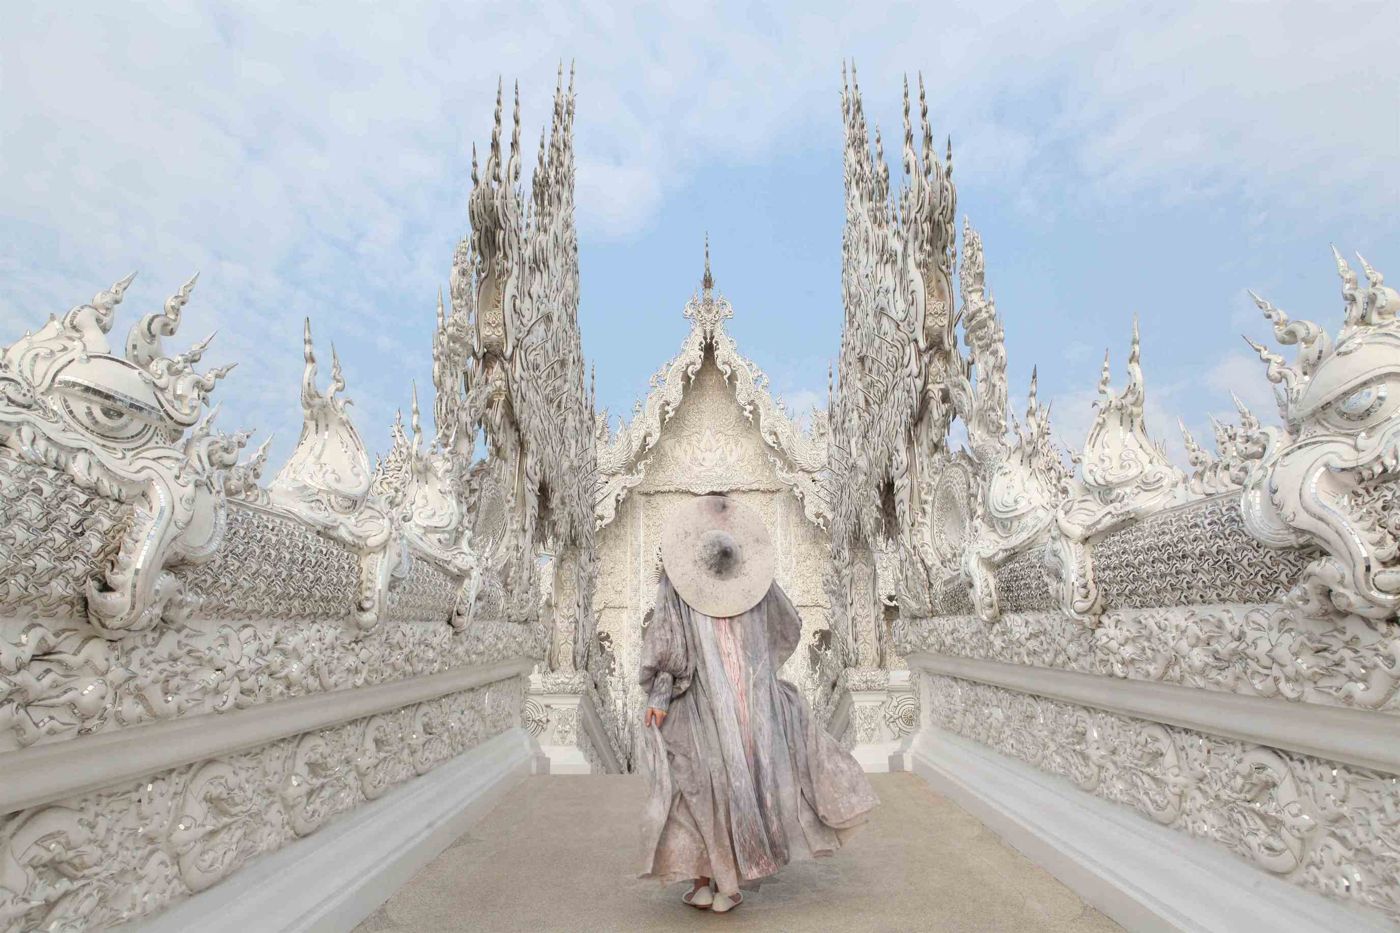 Top Chiang Rai temples you must visit in Thailand